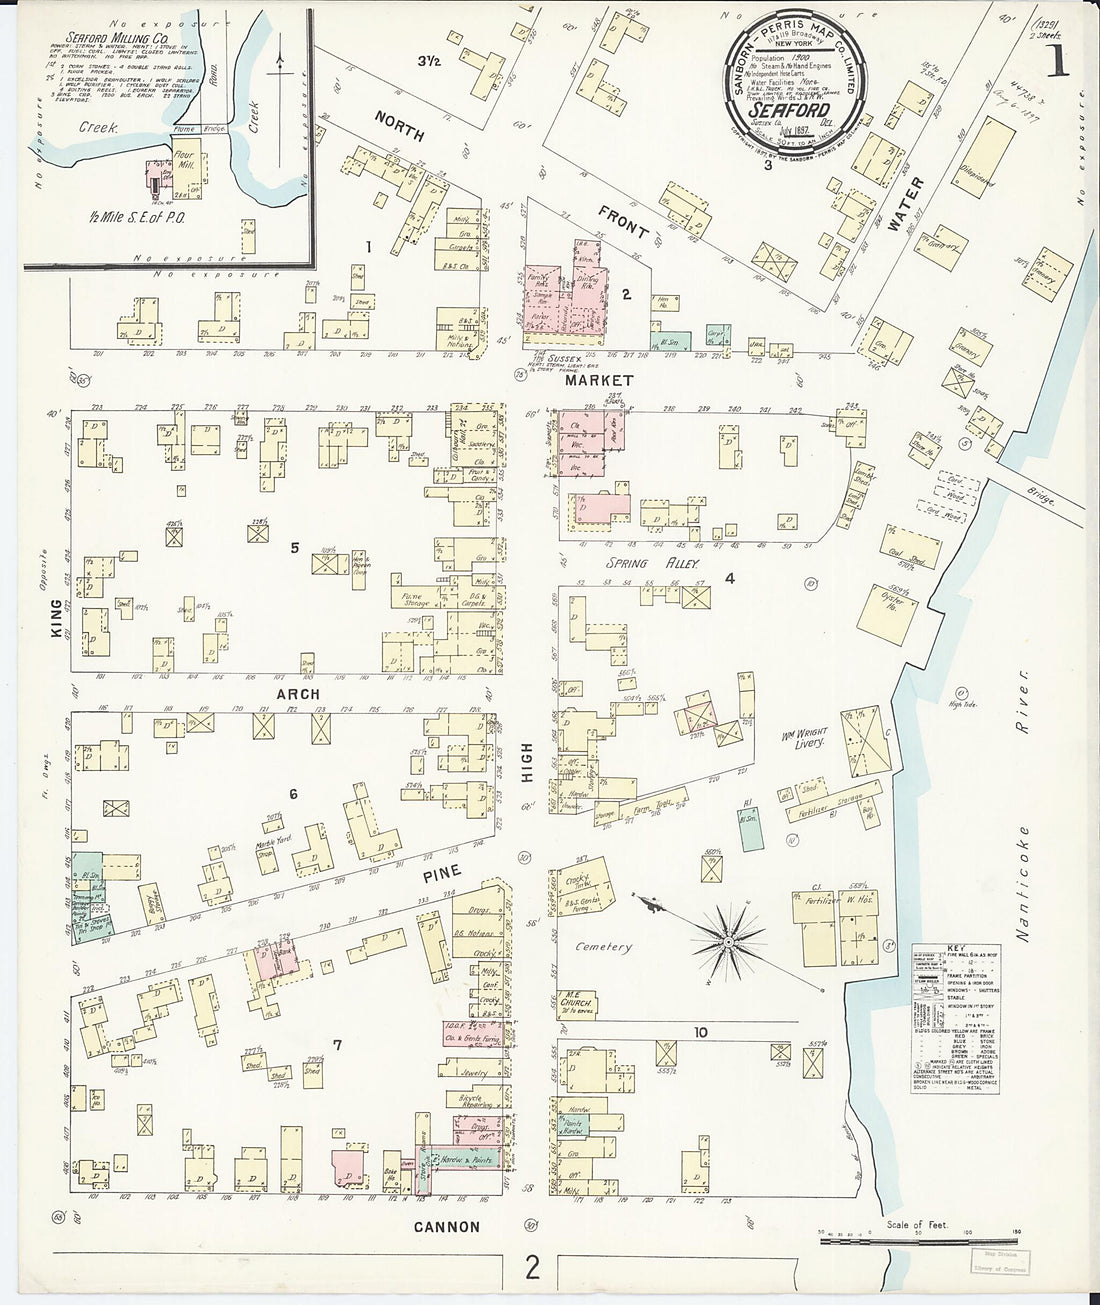 This old map of Seaford, Sussex County, Delaware was created by Sanborn Map Company in 1897